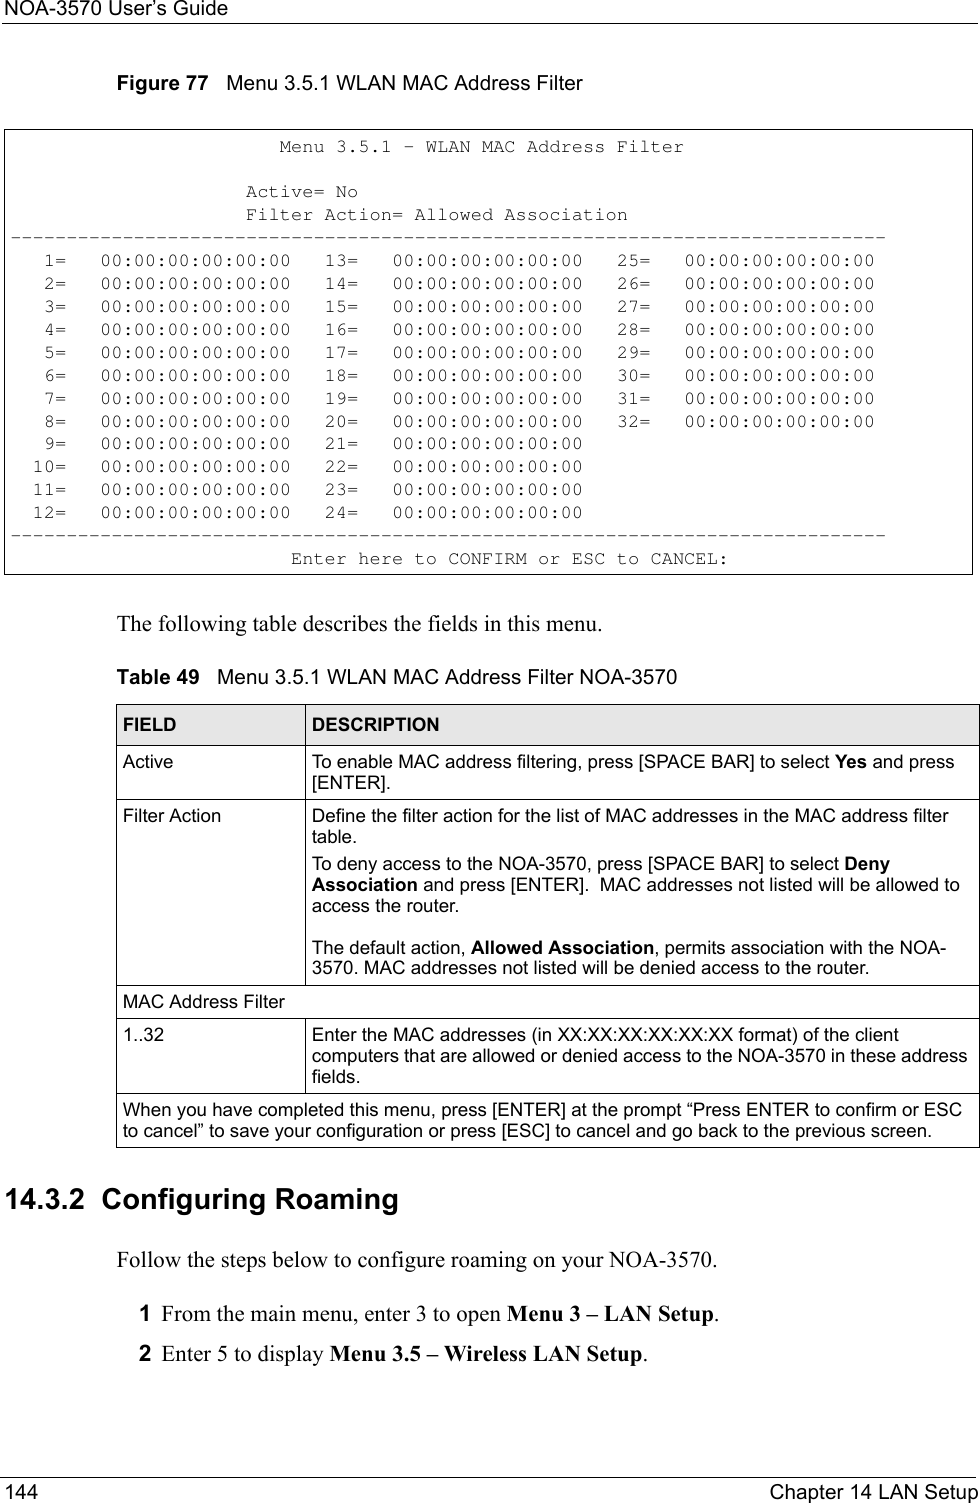 NOA-3570 User’s Guide144 Chapter 14 LAN SetupFigure 77   Menu 3.5.1 WLAN MAC Address FilterThe following table describes the fields in this menu.14.3.2  Configuring RoamingFollow the steps below to configure roaming on your NOA-3570.1From the main menu, enter 3 to open Menu 3 – LAN Setup.2Enter 5 to display Menu 3.5 – Wireless LAN Setup.                         Menu 3.5.1 - WLAN MAC Address Filter                     Active= No                     Filter Action= Allowed Association------------------------------------------------------------------------------   1=   00:00:00:00:00:00   13=   00:00:00:00:00:00   25=   00:00:00:00:00:00   2=   00:00:00:00:00:00   14=   00:00:00:00:00:00   26=   00:00:00:00:00:00   3=   00:00:00:00:00:00   15=   00:00:00:00:00:00   27=   00:00:00:00:00:00   4=   00:00:00:00:00:00   16=   00:00:00:00:00:00   28=   00:00:00:00:00:00   5=   00:00:00:00:00:00   17=   00:00:00:00:00:00   29=   00:00:00:00:00:00   6=   00:00:00:00:00:00   18=   00:00:00:00:00:00   30=   00:00:00:00:00:00   7=   00:00:00:00:00:00   19=   00:00:00:00:00:00   31=   00:00:00:00:00:00   8=   00:00:00:00:00:00   20=   00:00:00:00:00:00   32=   00:00:00:00:00:00   9=   00:00:00:00:00:00   21=   00:00:00:00:00:00  10=   00:00:00:00:00:00   22=   00:00:00:00:00:00  11=   00:00:00:00:00:00   23=   00:00:00:00:00:00  12=   00:00:00:00:00:00   24=   00:00:00:00:00:00------------------------------------------------------------------------------                         Enter here to CONFIRM or ESC to CANCEL:Table 49   Menu 3.5.1 WLAN MAC Address Filter NOA-3570FIELD DESCRIPTIONActive To enable MAC address filtering, press [SPACE BAR] to select Yes and press [ENTER]. Filter Action  Define the filter action for the list of MAC addresses in the MAC address filter table. To deny access to the NOA-3570, press [SPACE BAR] to select Deny Association and press [ENTER].  MAC addresses not listed will be allowed to access the router.The default action, Allowed Association, permits association with the NOA-3570. MAC addresses not listed will be denied access to the router. MAC Address Filter1..32 Enter the MAC addresses (in XX:XX:XX:XX:XX:XX format) of the client computers that are allowed or denied access to the NOA-3570 in these address fields. When you have completed this menu, press [ENTER] at the prompt “Press ENTER to confirm or ESC to cancel” to save your configuration or press [ESC] to cancel and go back to the previous screen.